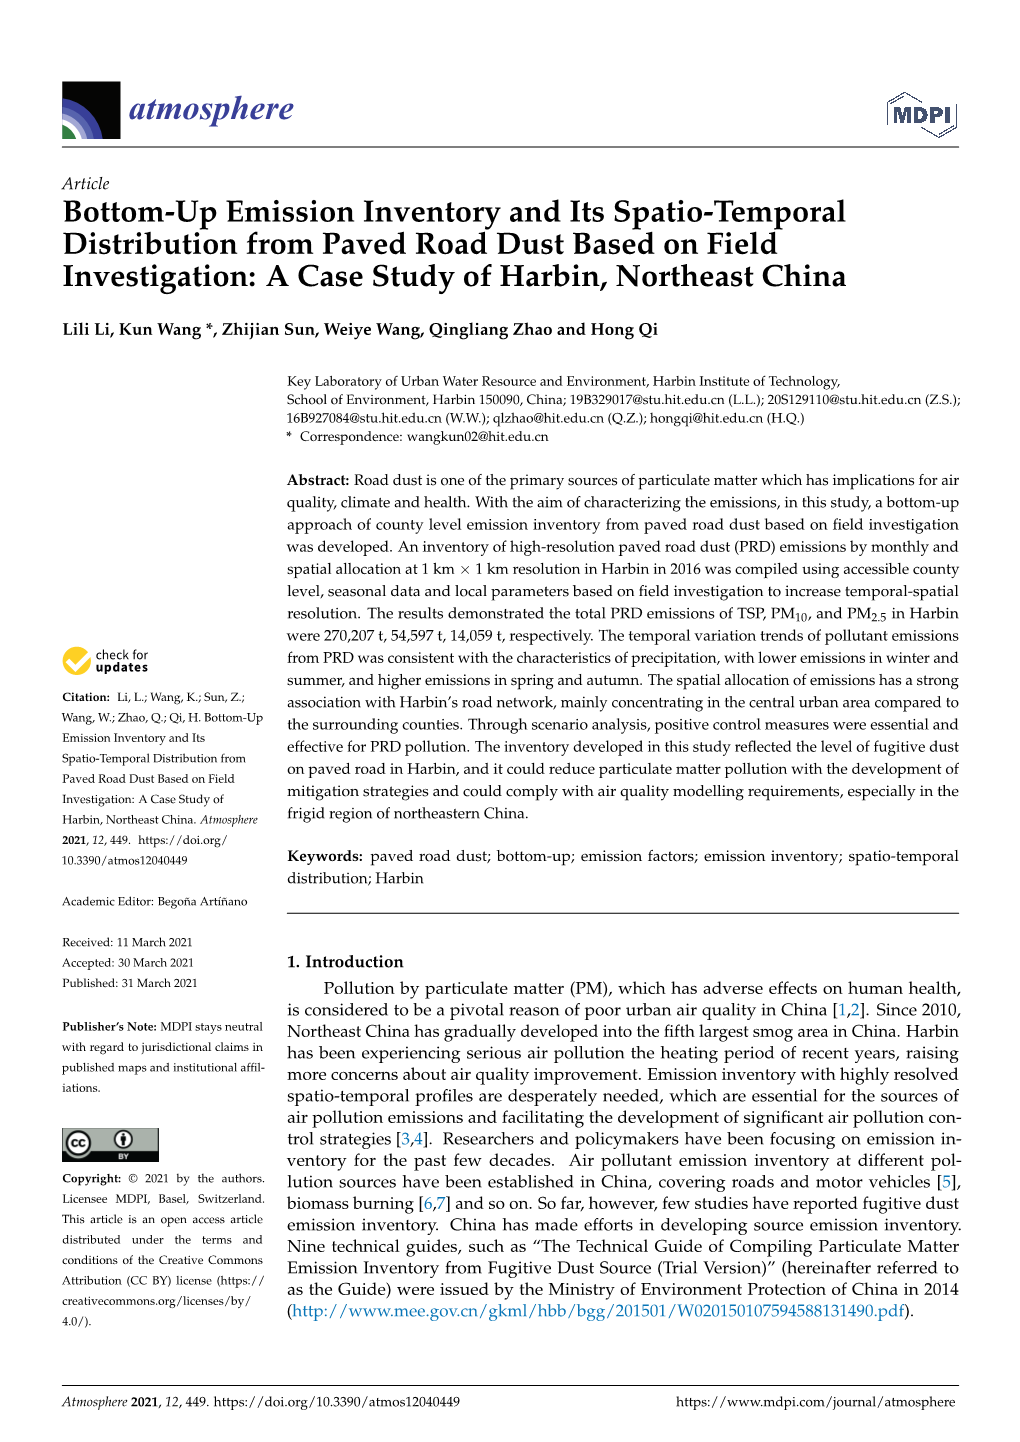 Bottom-Up Emission Inventory and Its Spatio-Temporal Distribution from Paved Road Dust Based on Field Investigation: a Case Study of Harbin, Northeast China